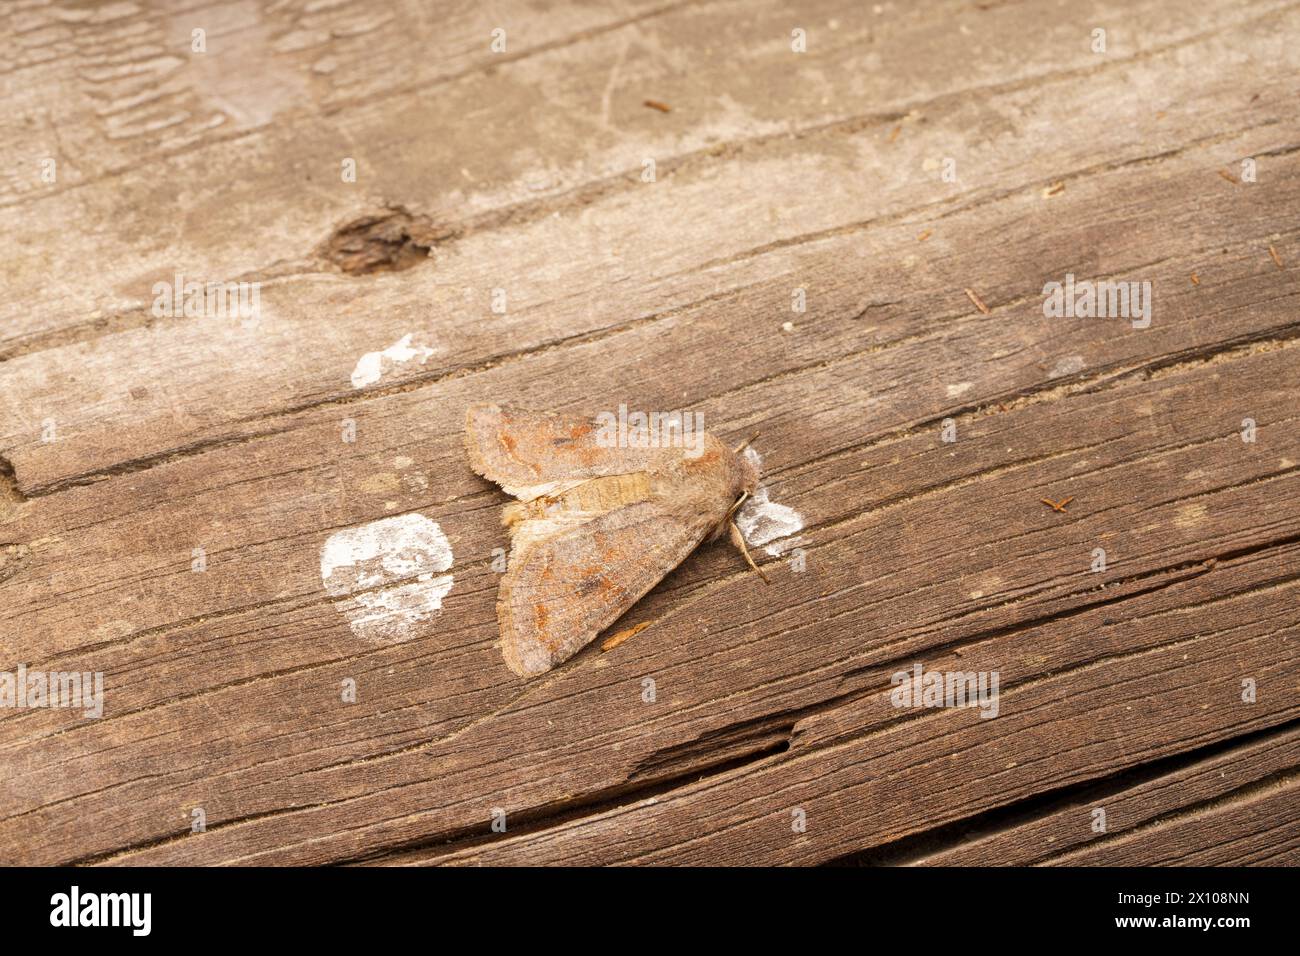 Orthosia incerta Family Noctuidae Genus Orthosia Clouded drab moth wild nature insect photography, picture, wallpaper Stock Photo